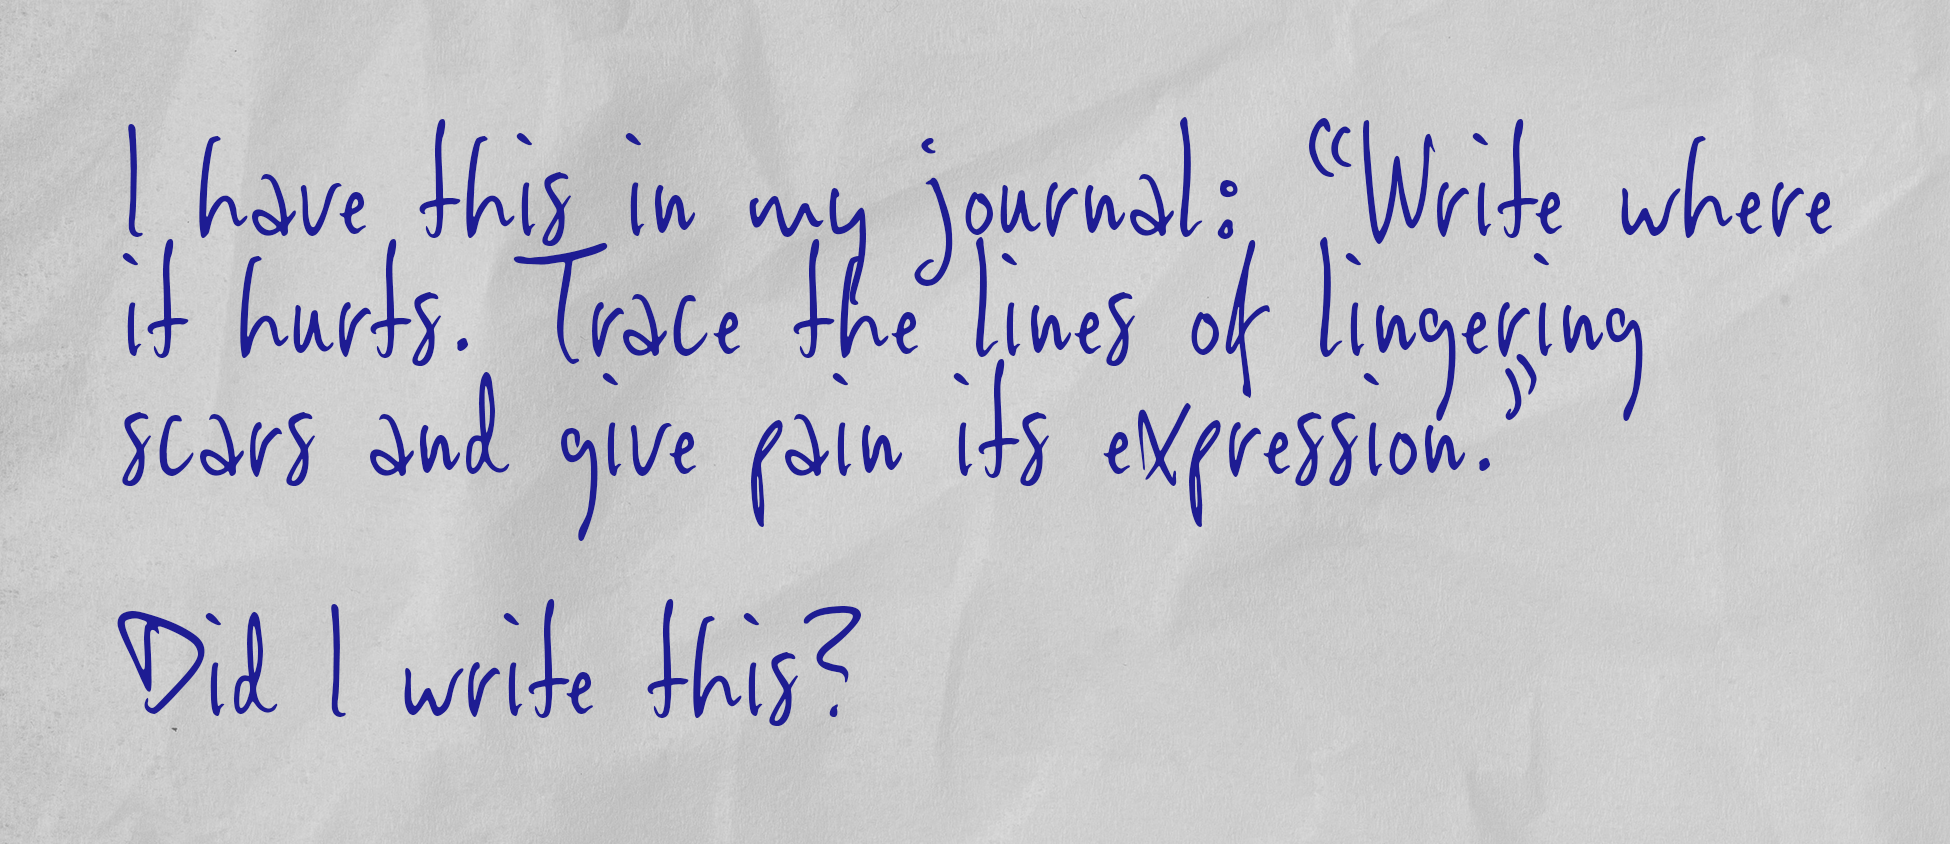 I have this in my journal: “Write where it hurts. Trace the lines of lingering scars and give pain its expression.”  Did I write this?